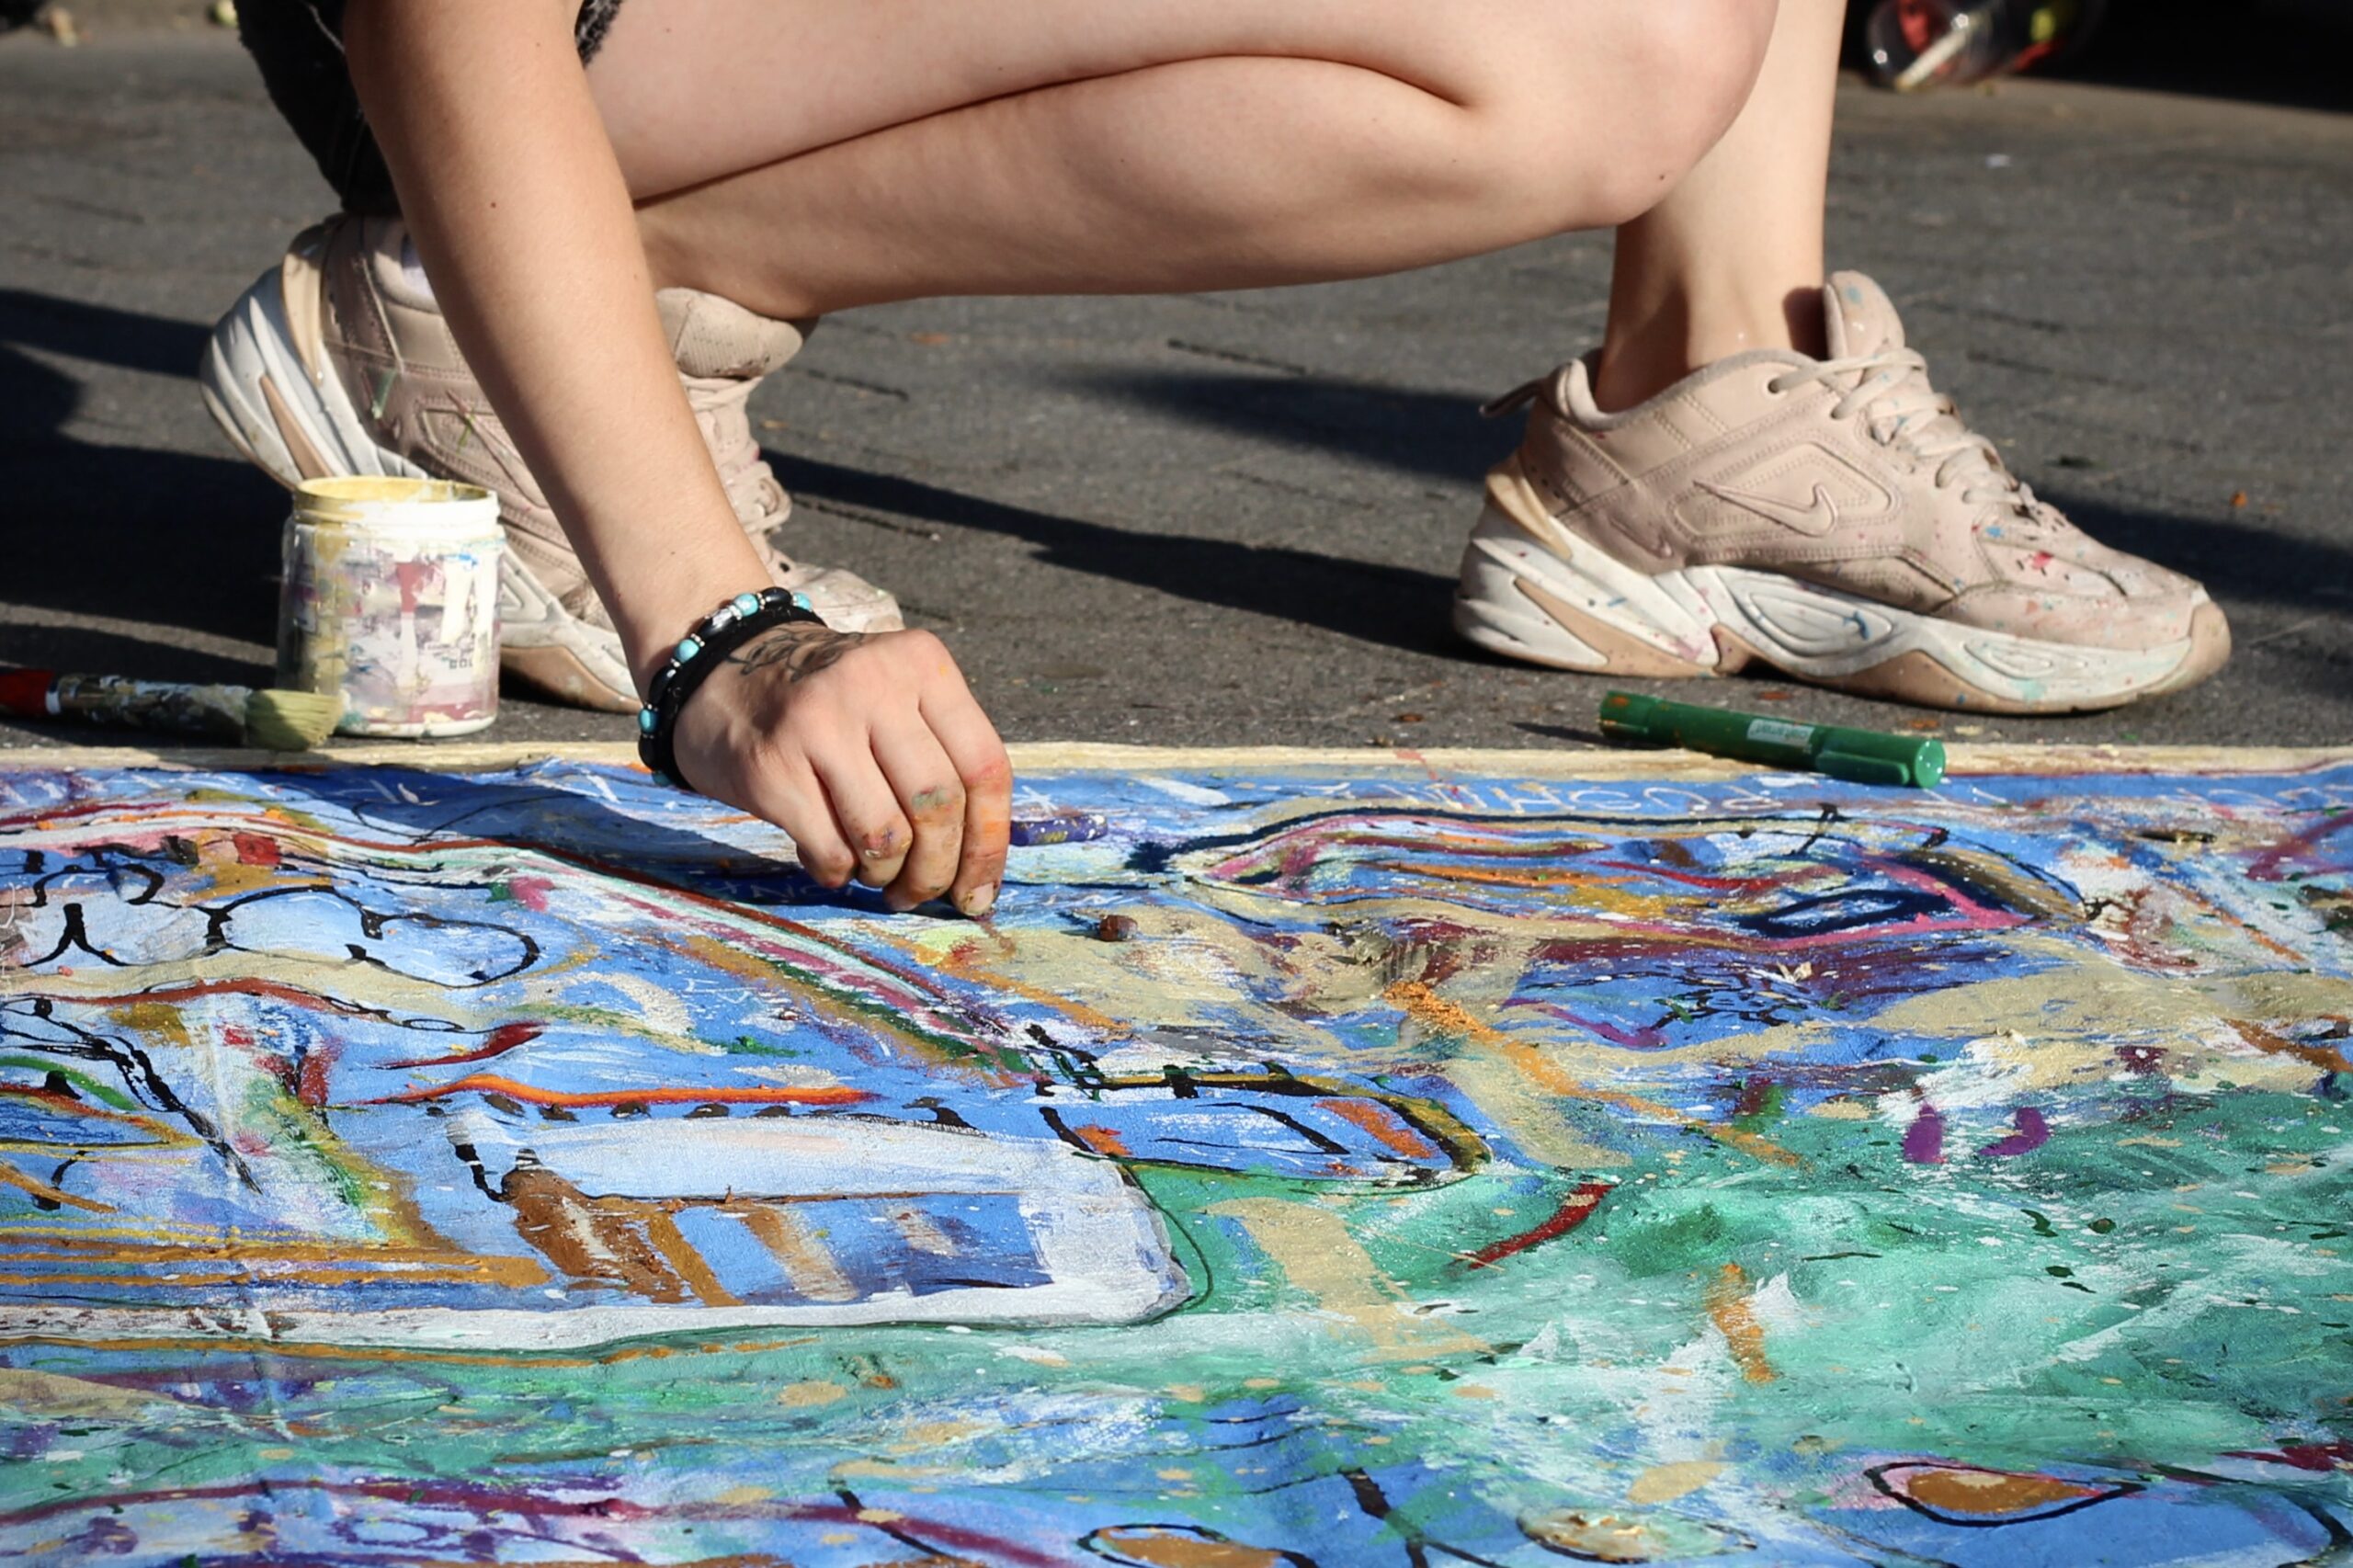 Elizabeth Yurovskaya, 22, who goes by the name ZilFutura, paints in Washington Square Park. Yurovskaya says she has been asked by police to pack up her art before, a request she complied with. “I didn’t want trouble.” (Credit: Mukta Joshi)